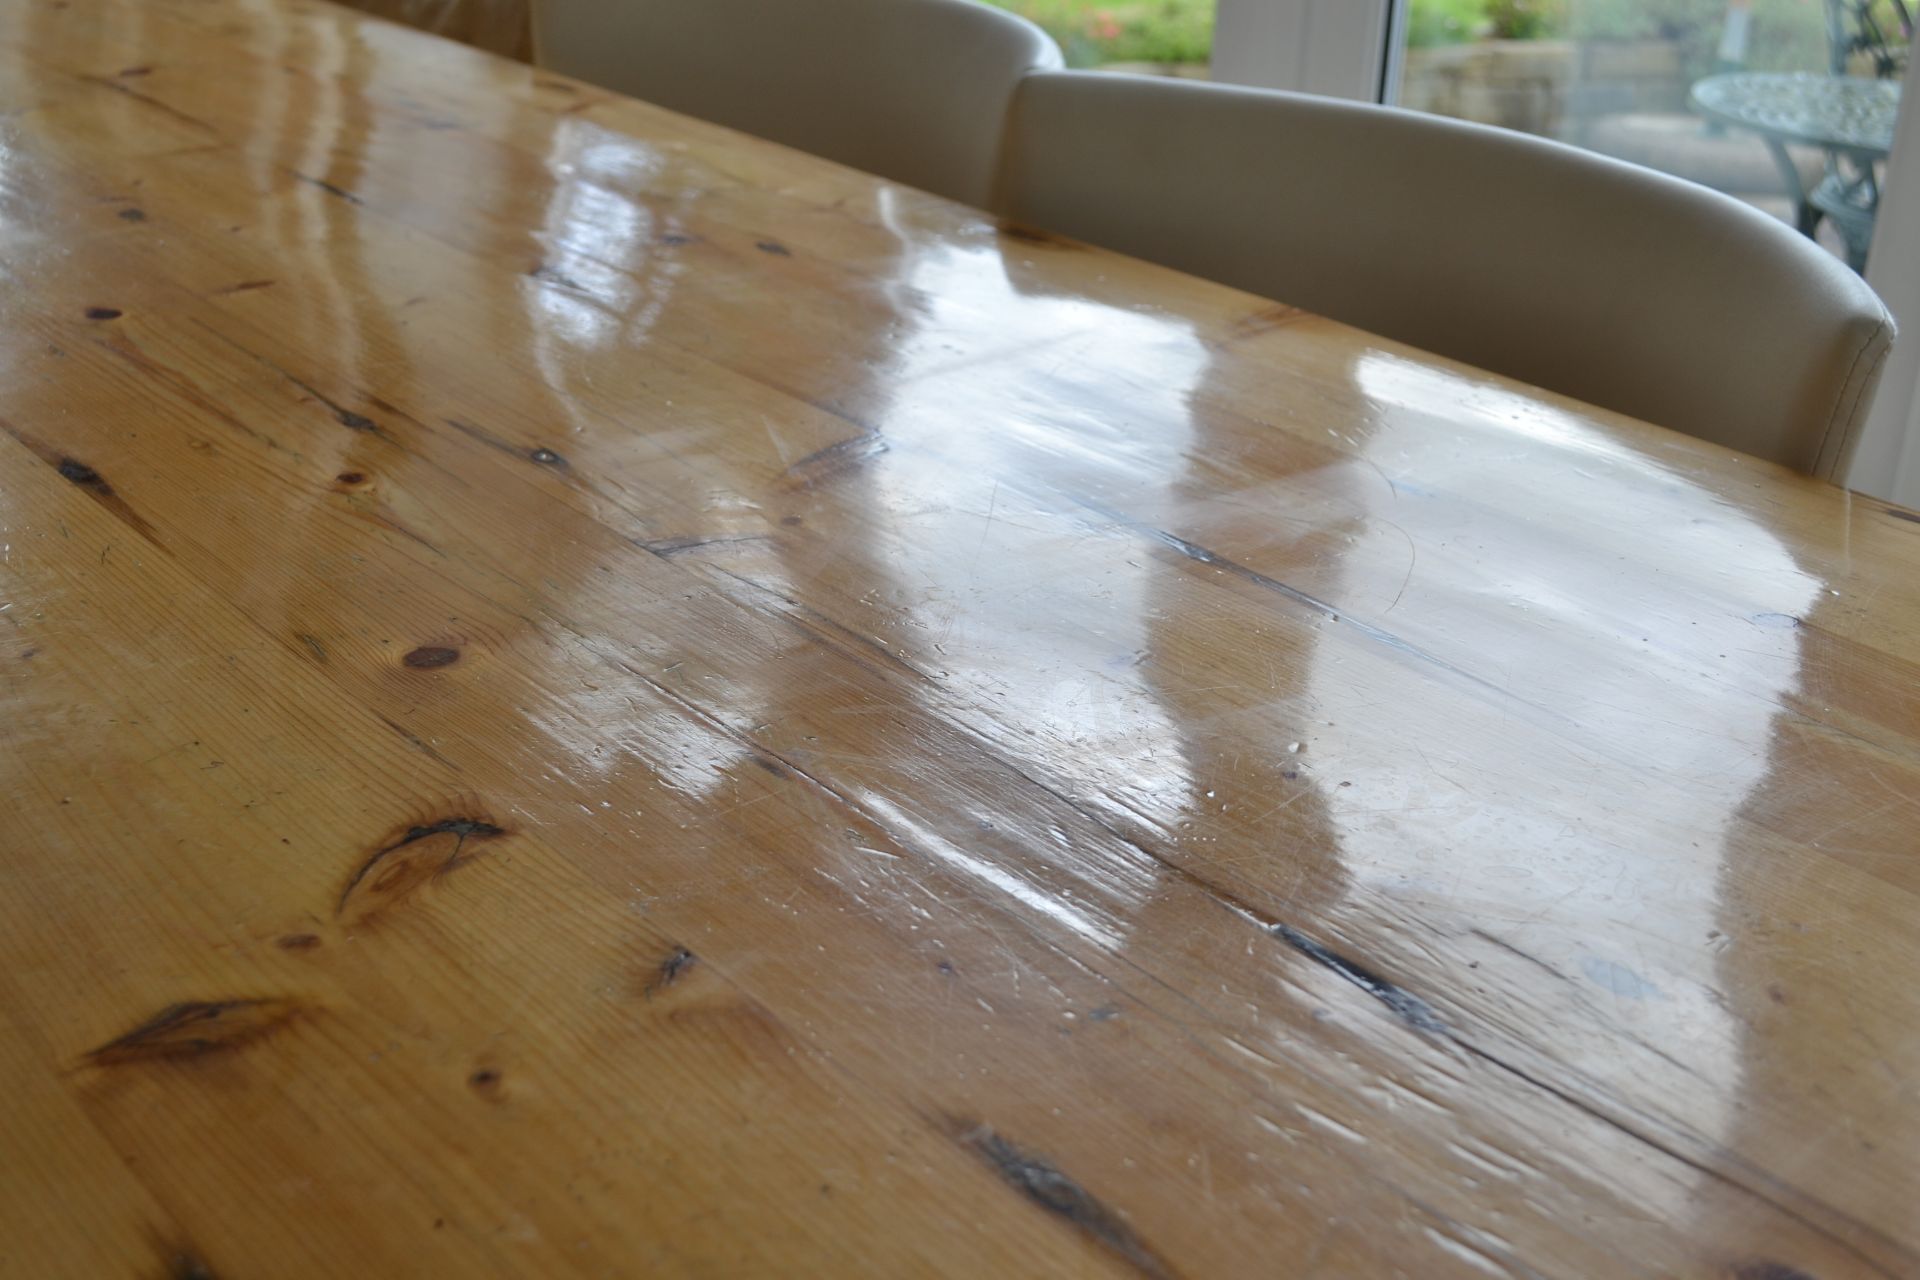 1 x Bespoke Pine Dining Table Made From Reclaimed Church Pews - CL226 - Location: Knutsford WA16 - Image 5 of 9